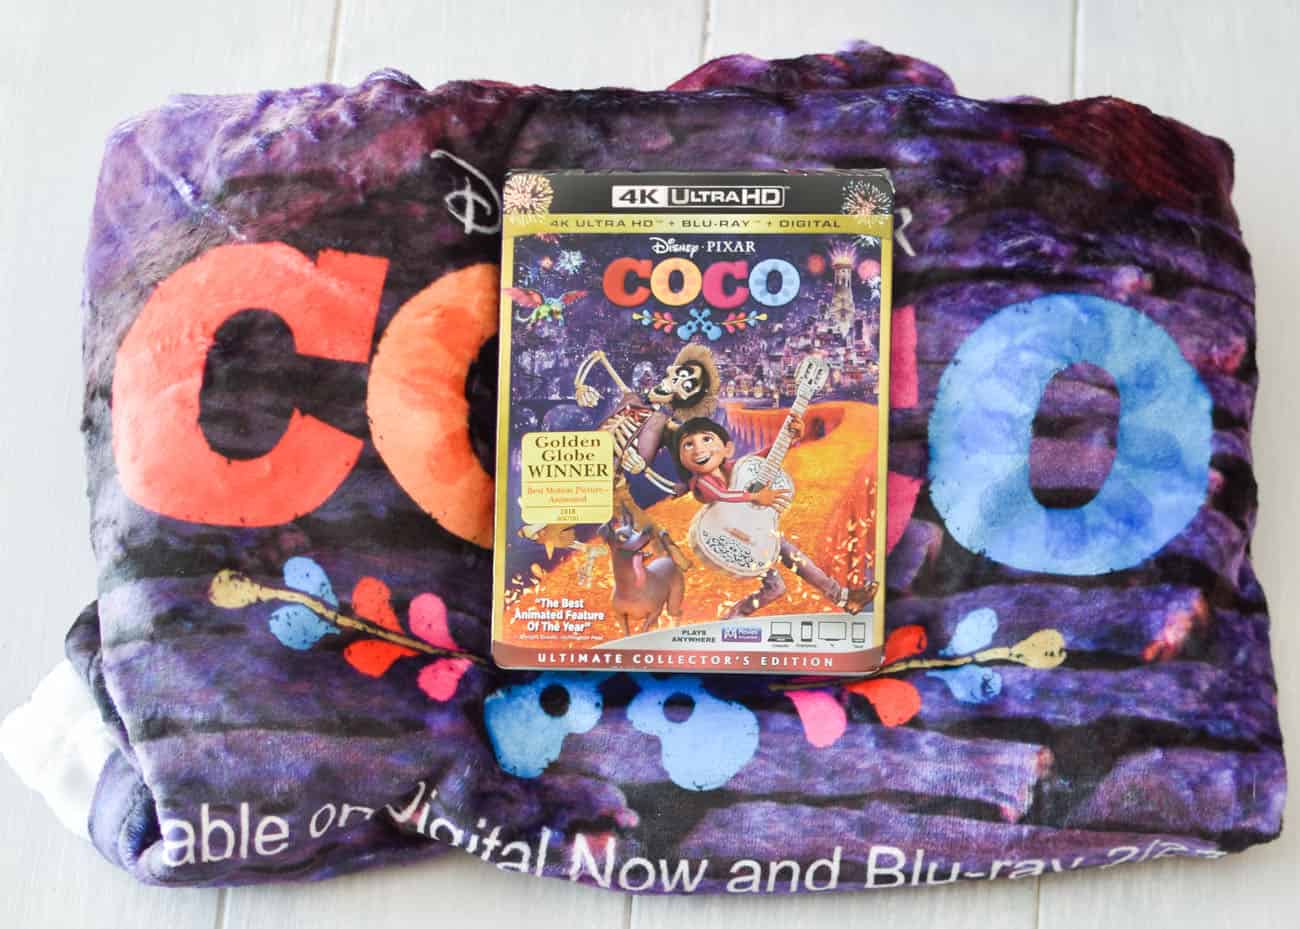 coco movie party with Mexican hot chocolate recipe